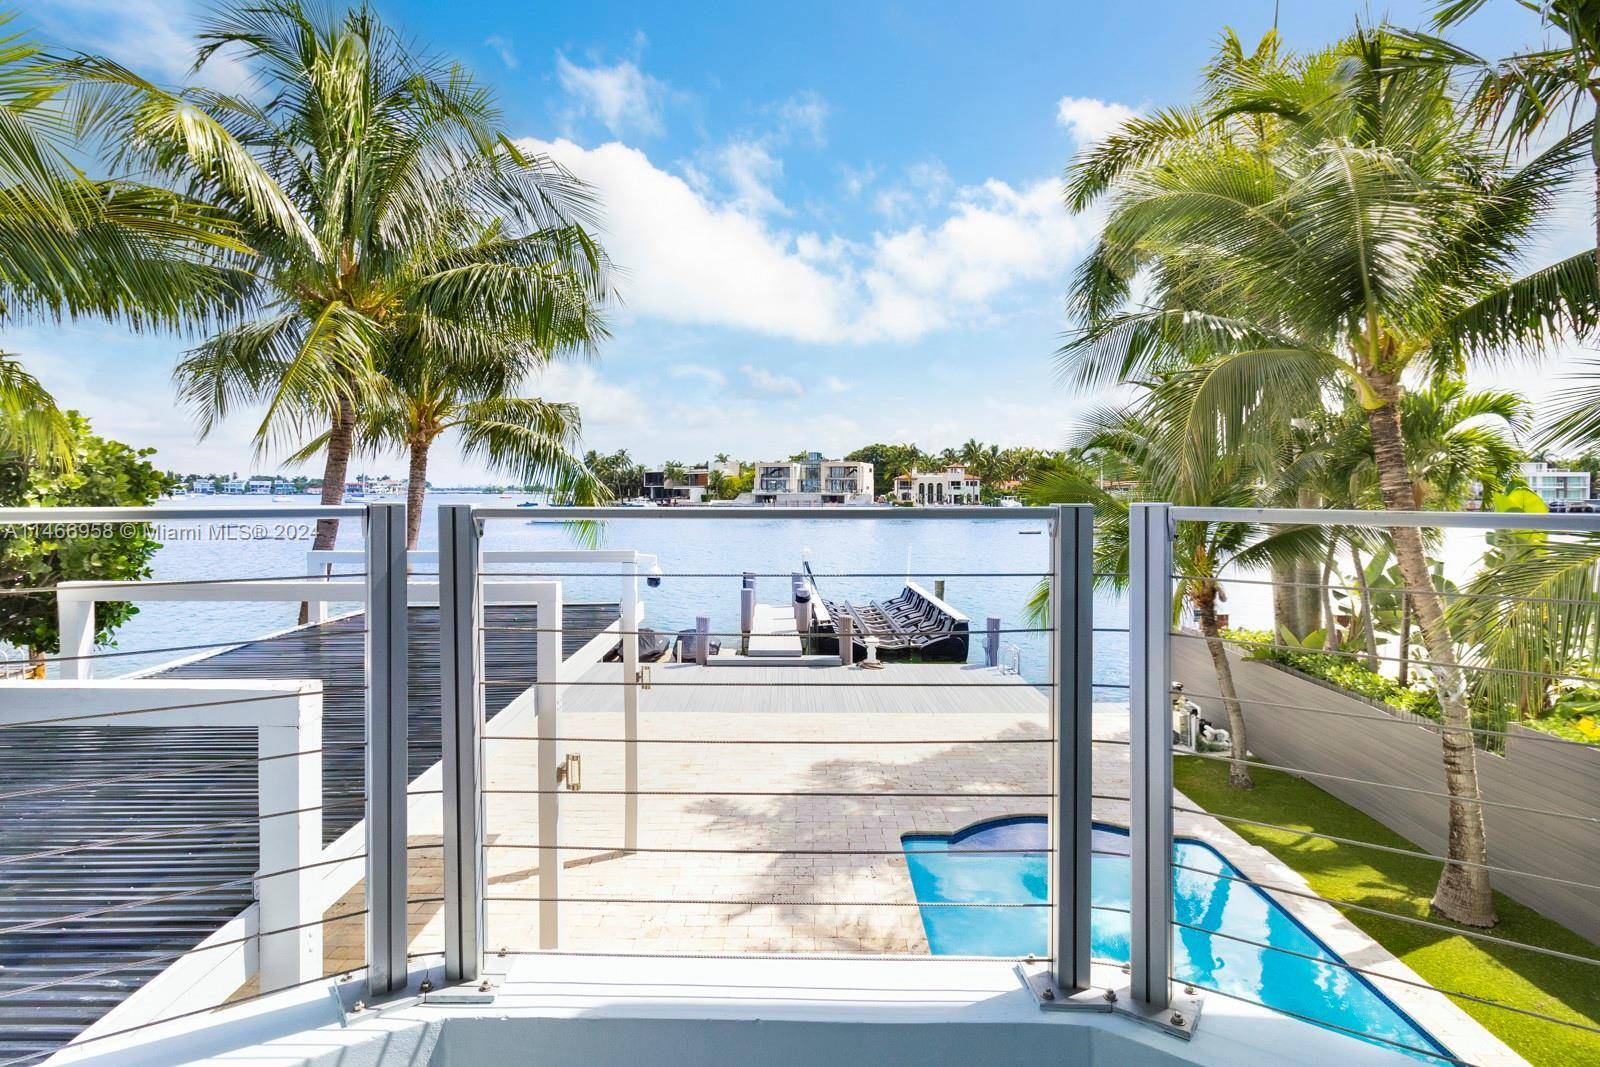 This spectacular waterfront home has been totally renovated with a construction upgrade of a new entrance and third floor railings in 2019.